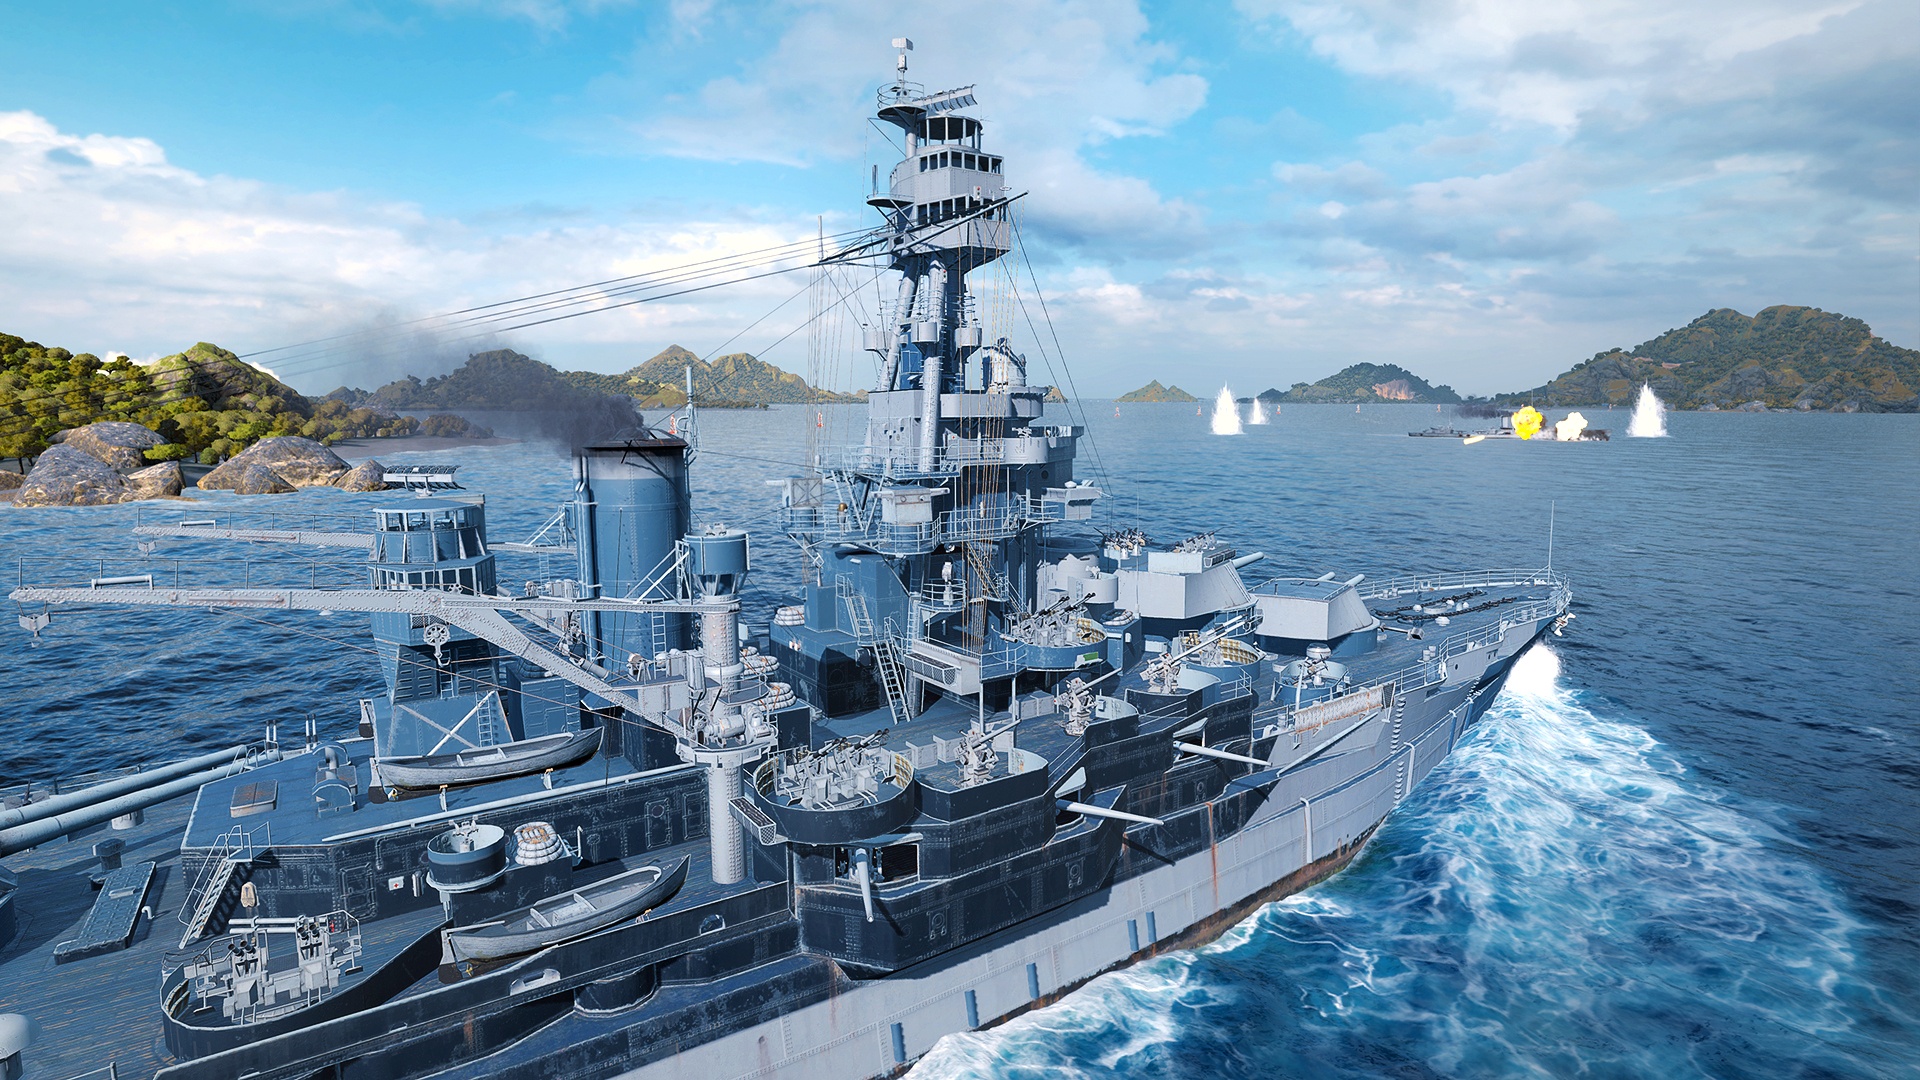 world of warships: legends update ps4